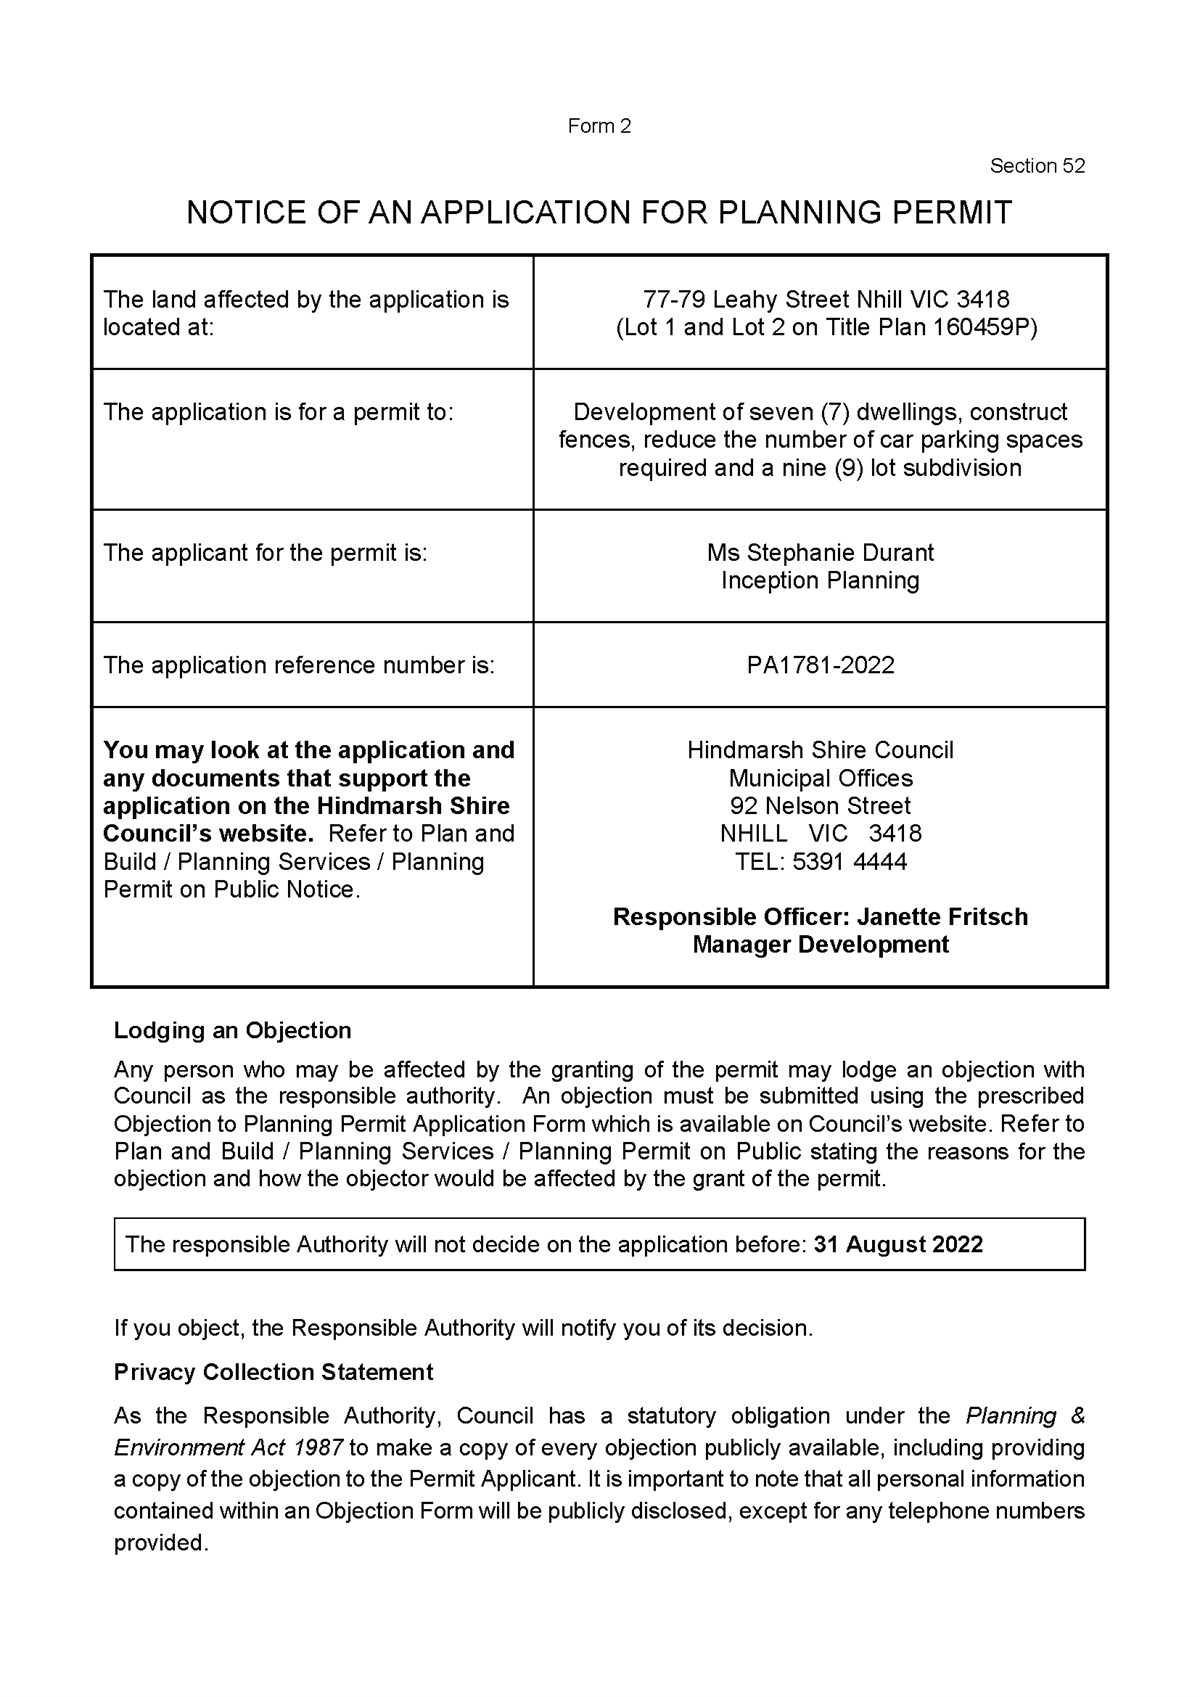 2022_08_17 - PA1781-2022 ADVERT - Form 2 V2.png